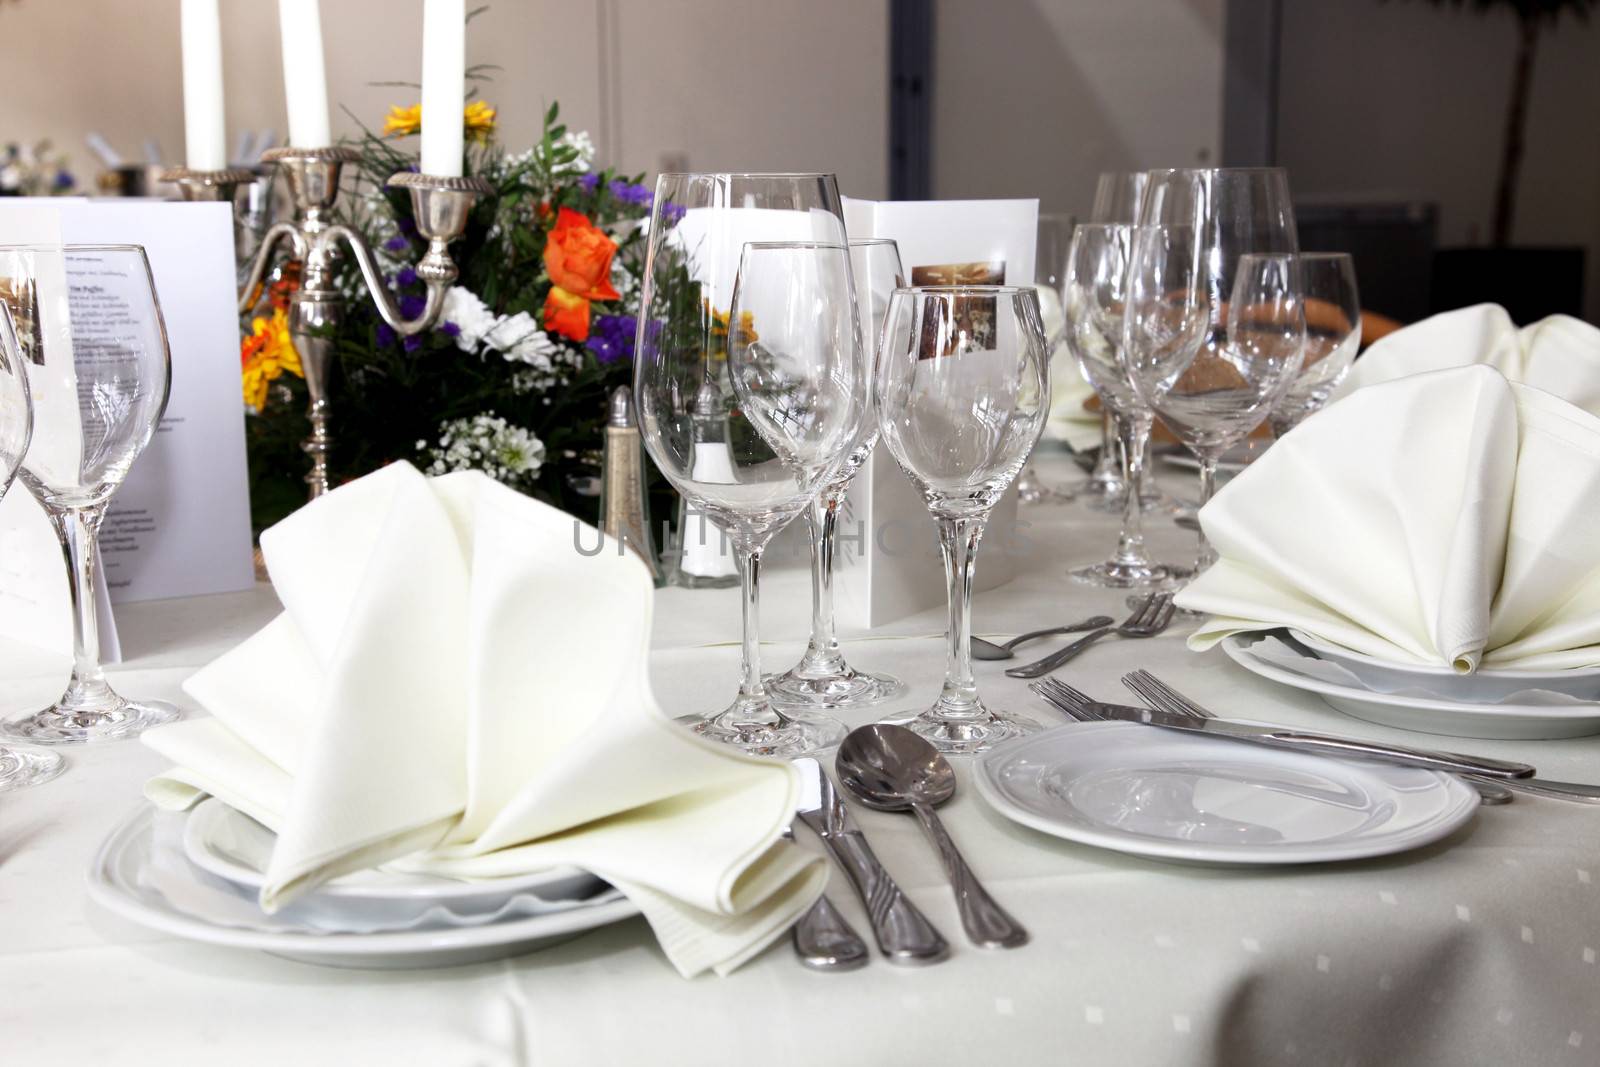 Stylish white table setting with elegant glassware, silverware and a floral centrepiece at a wedding reception